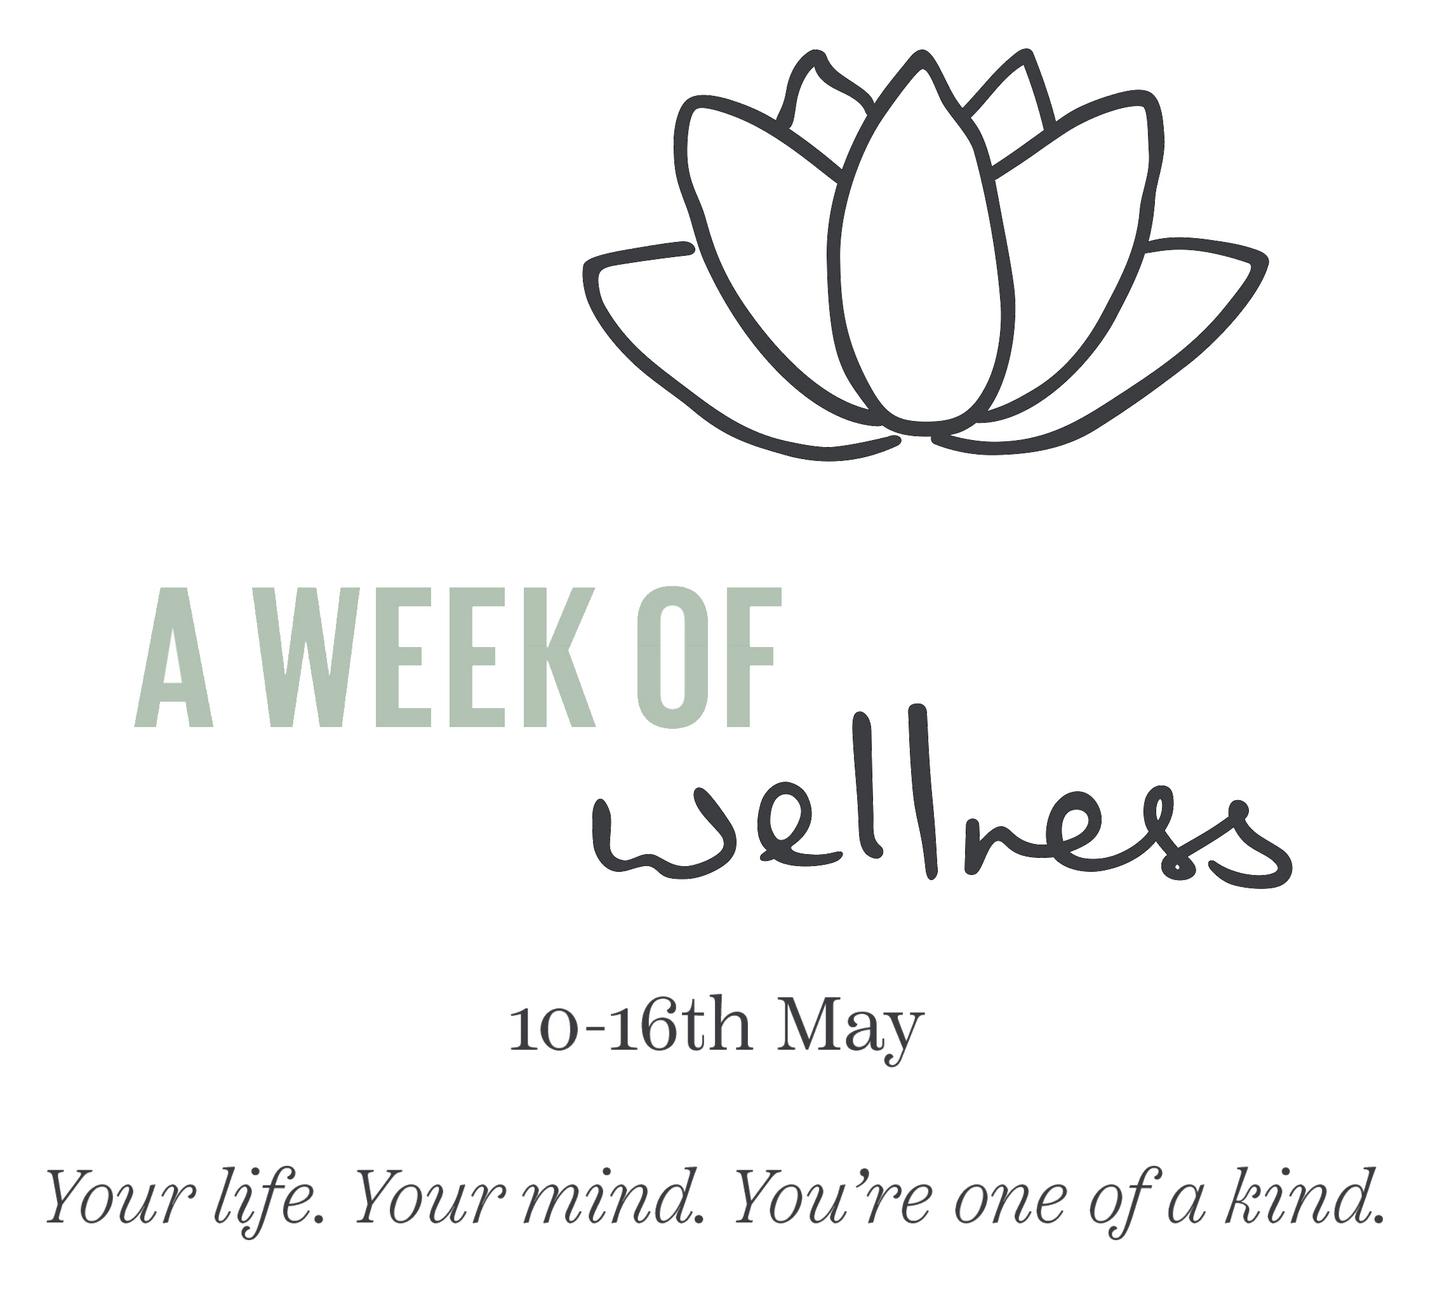 A week of wellness 10-16th May. Your life. Your mind. You're one of a kind.